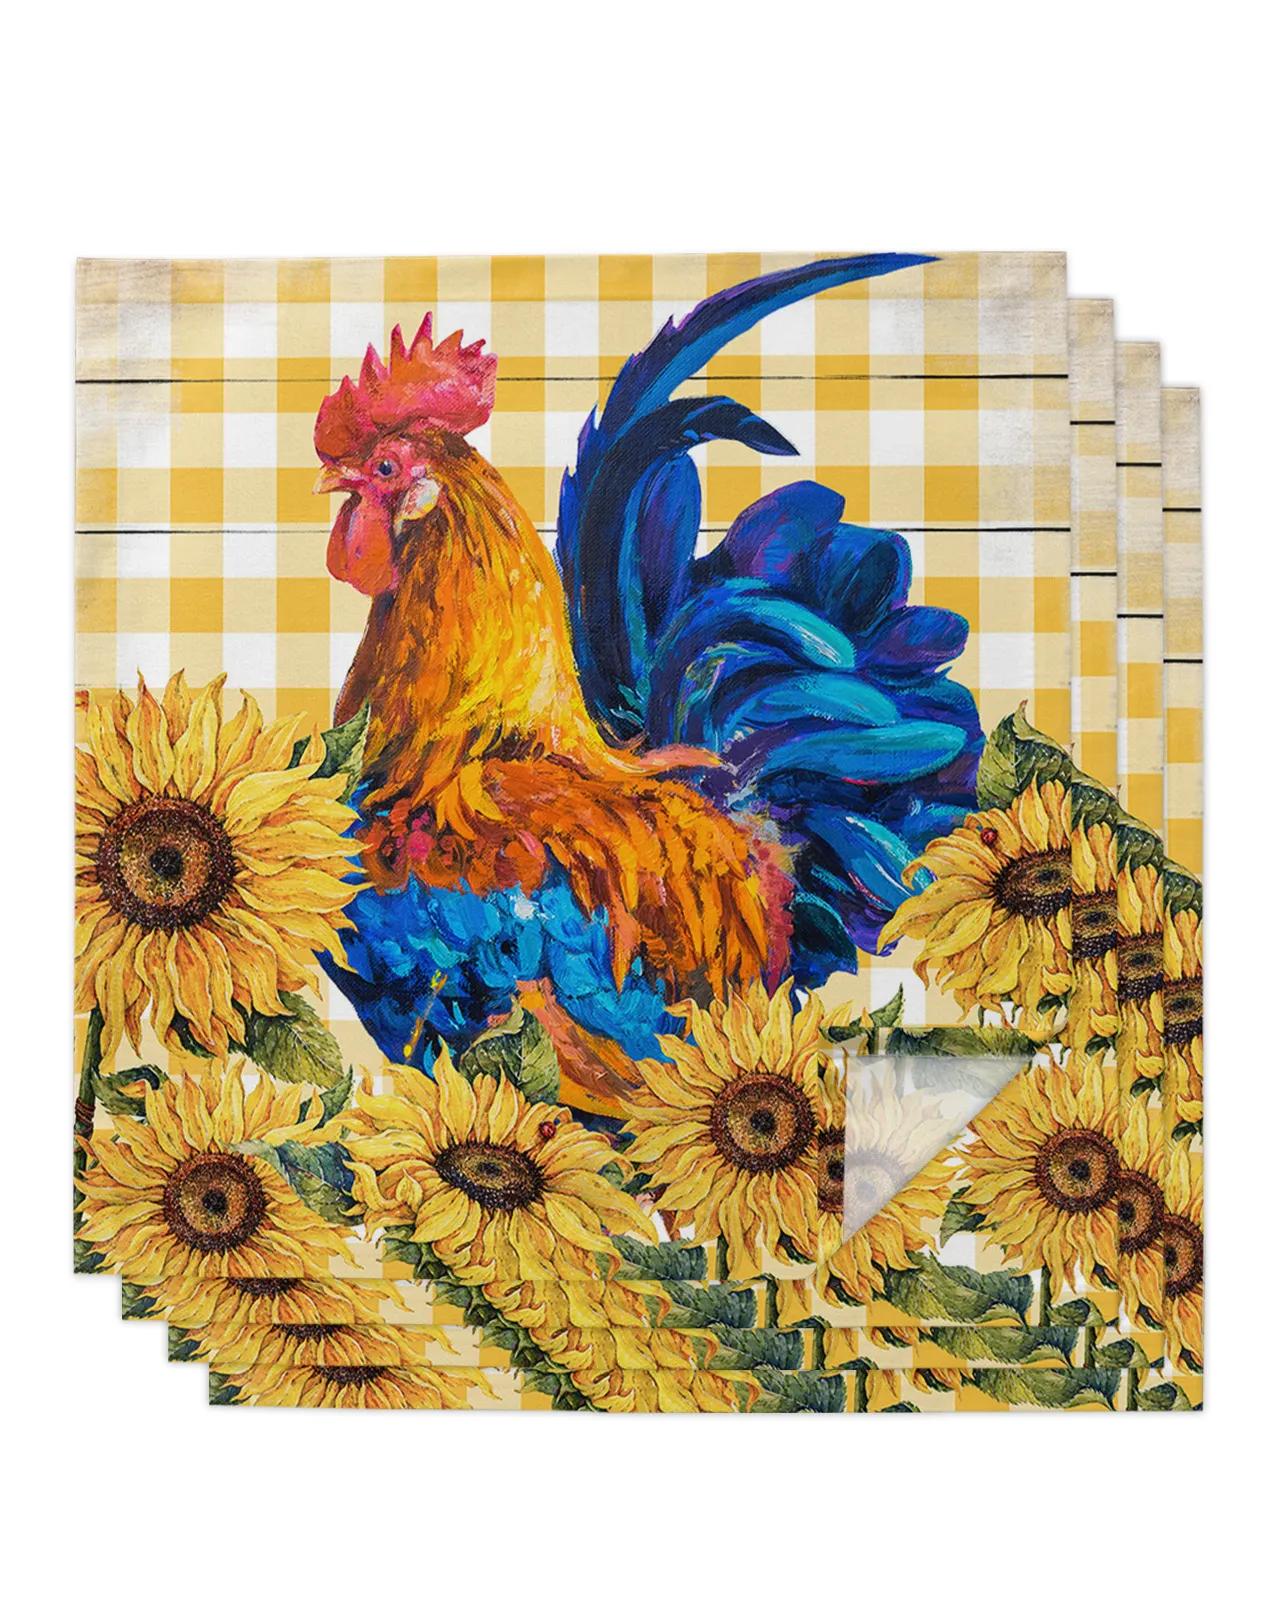 Rustic Farm Chicken Sunflower Plaid Table Napkin for Wedding Party Napkin Printed Placemat Tea Towels for Kitchen Dining Table